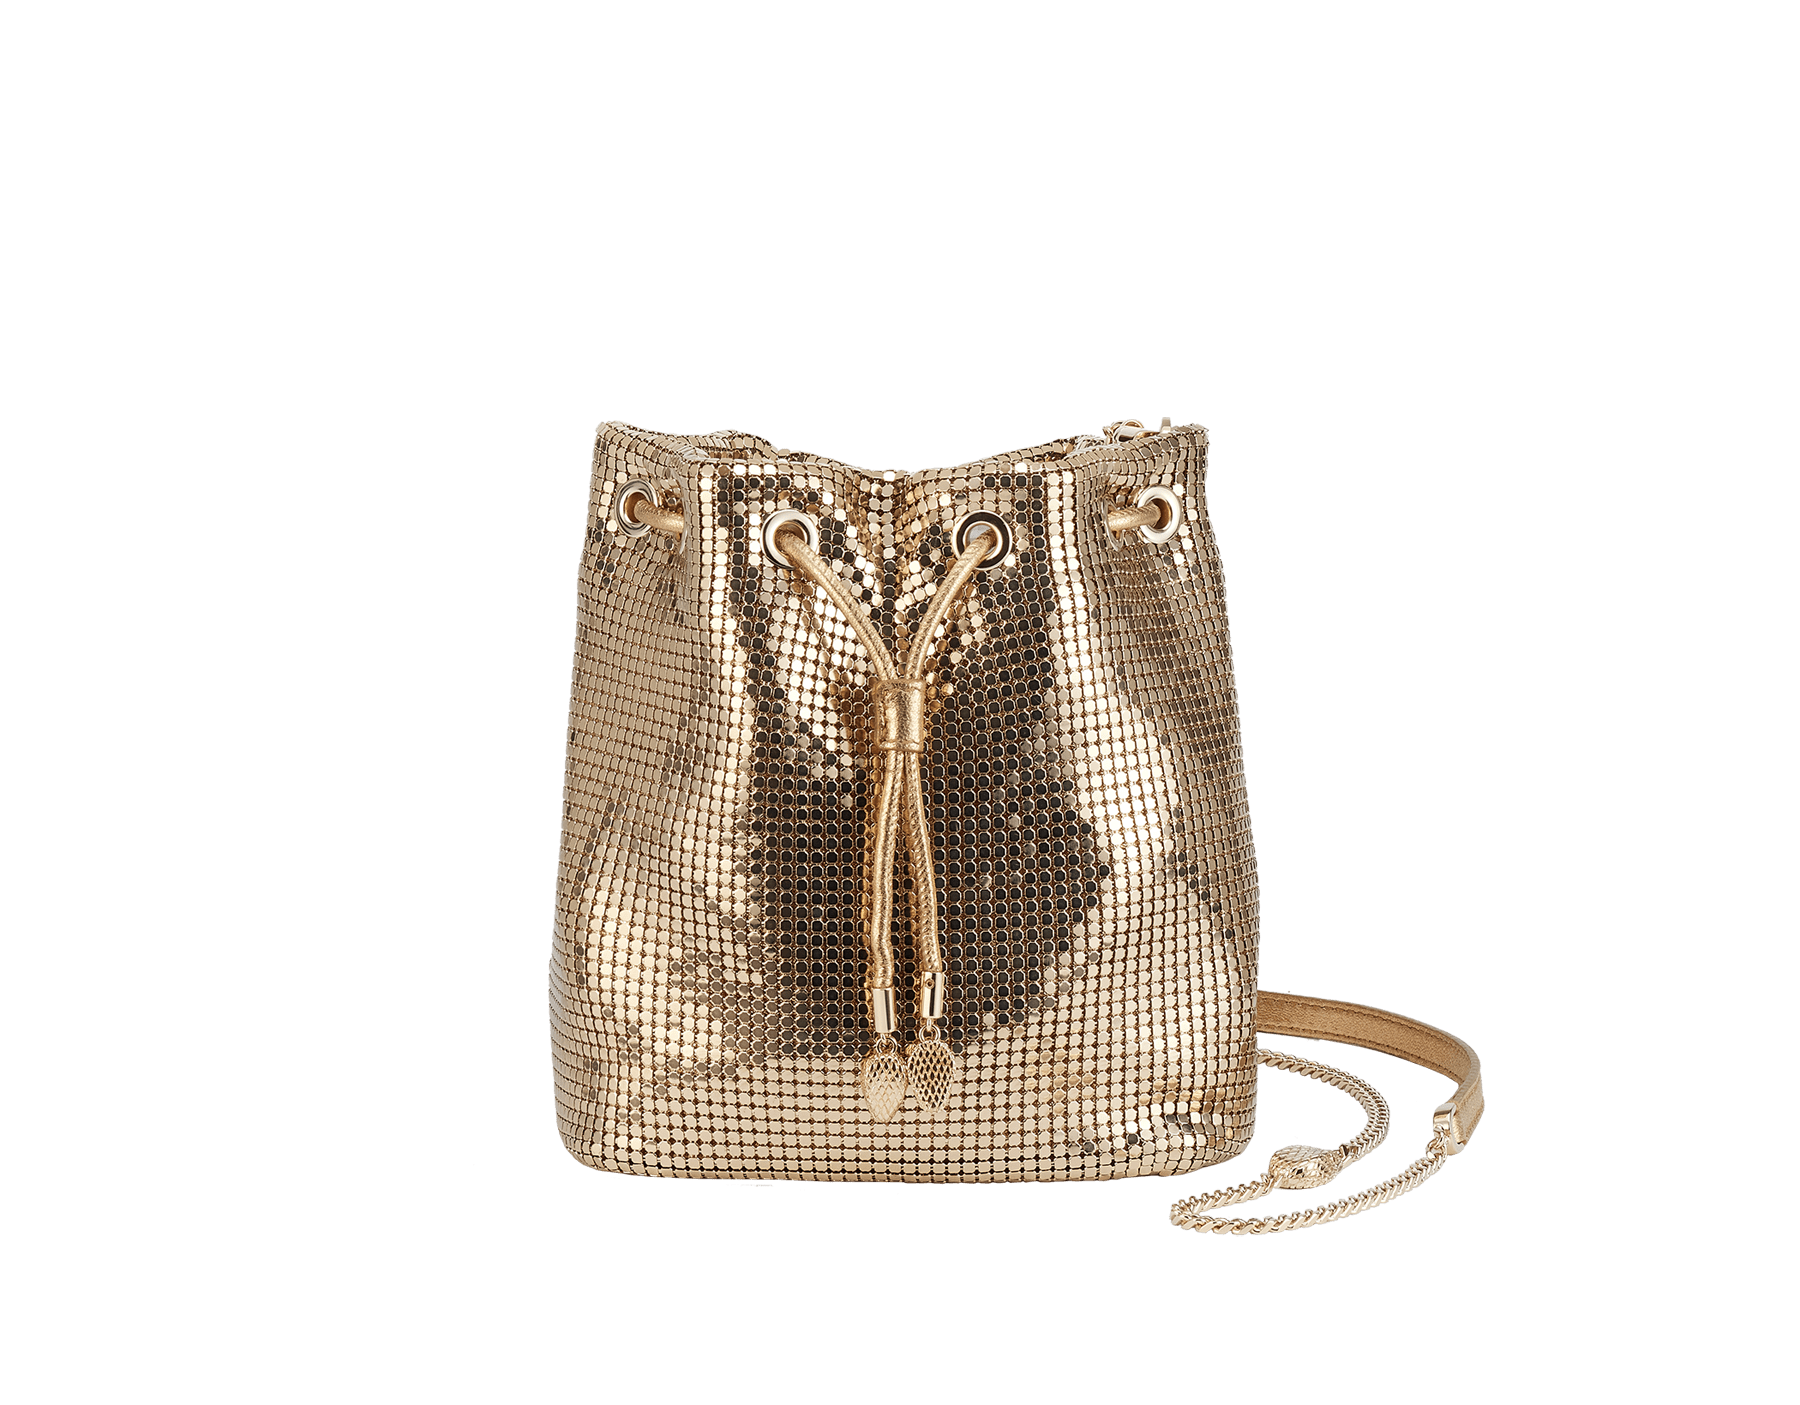 Serpenti Forever mini bucket bag in shiny gold nappa leather with light gold-plated brass metal mesh. Captivating snakehead drawstring and chain strap decors in light gold-plated brass. 291694 image 1